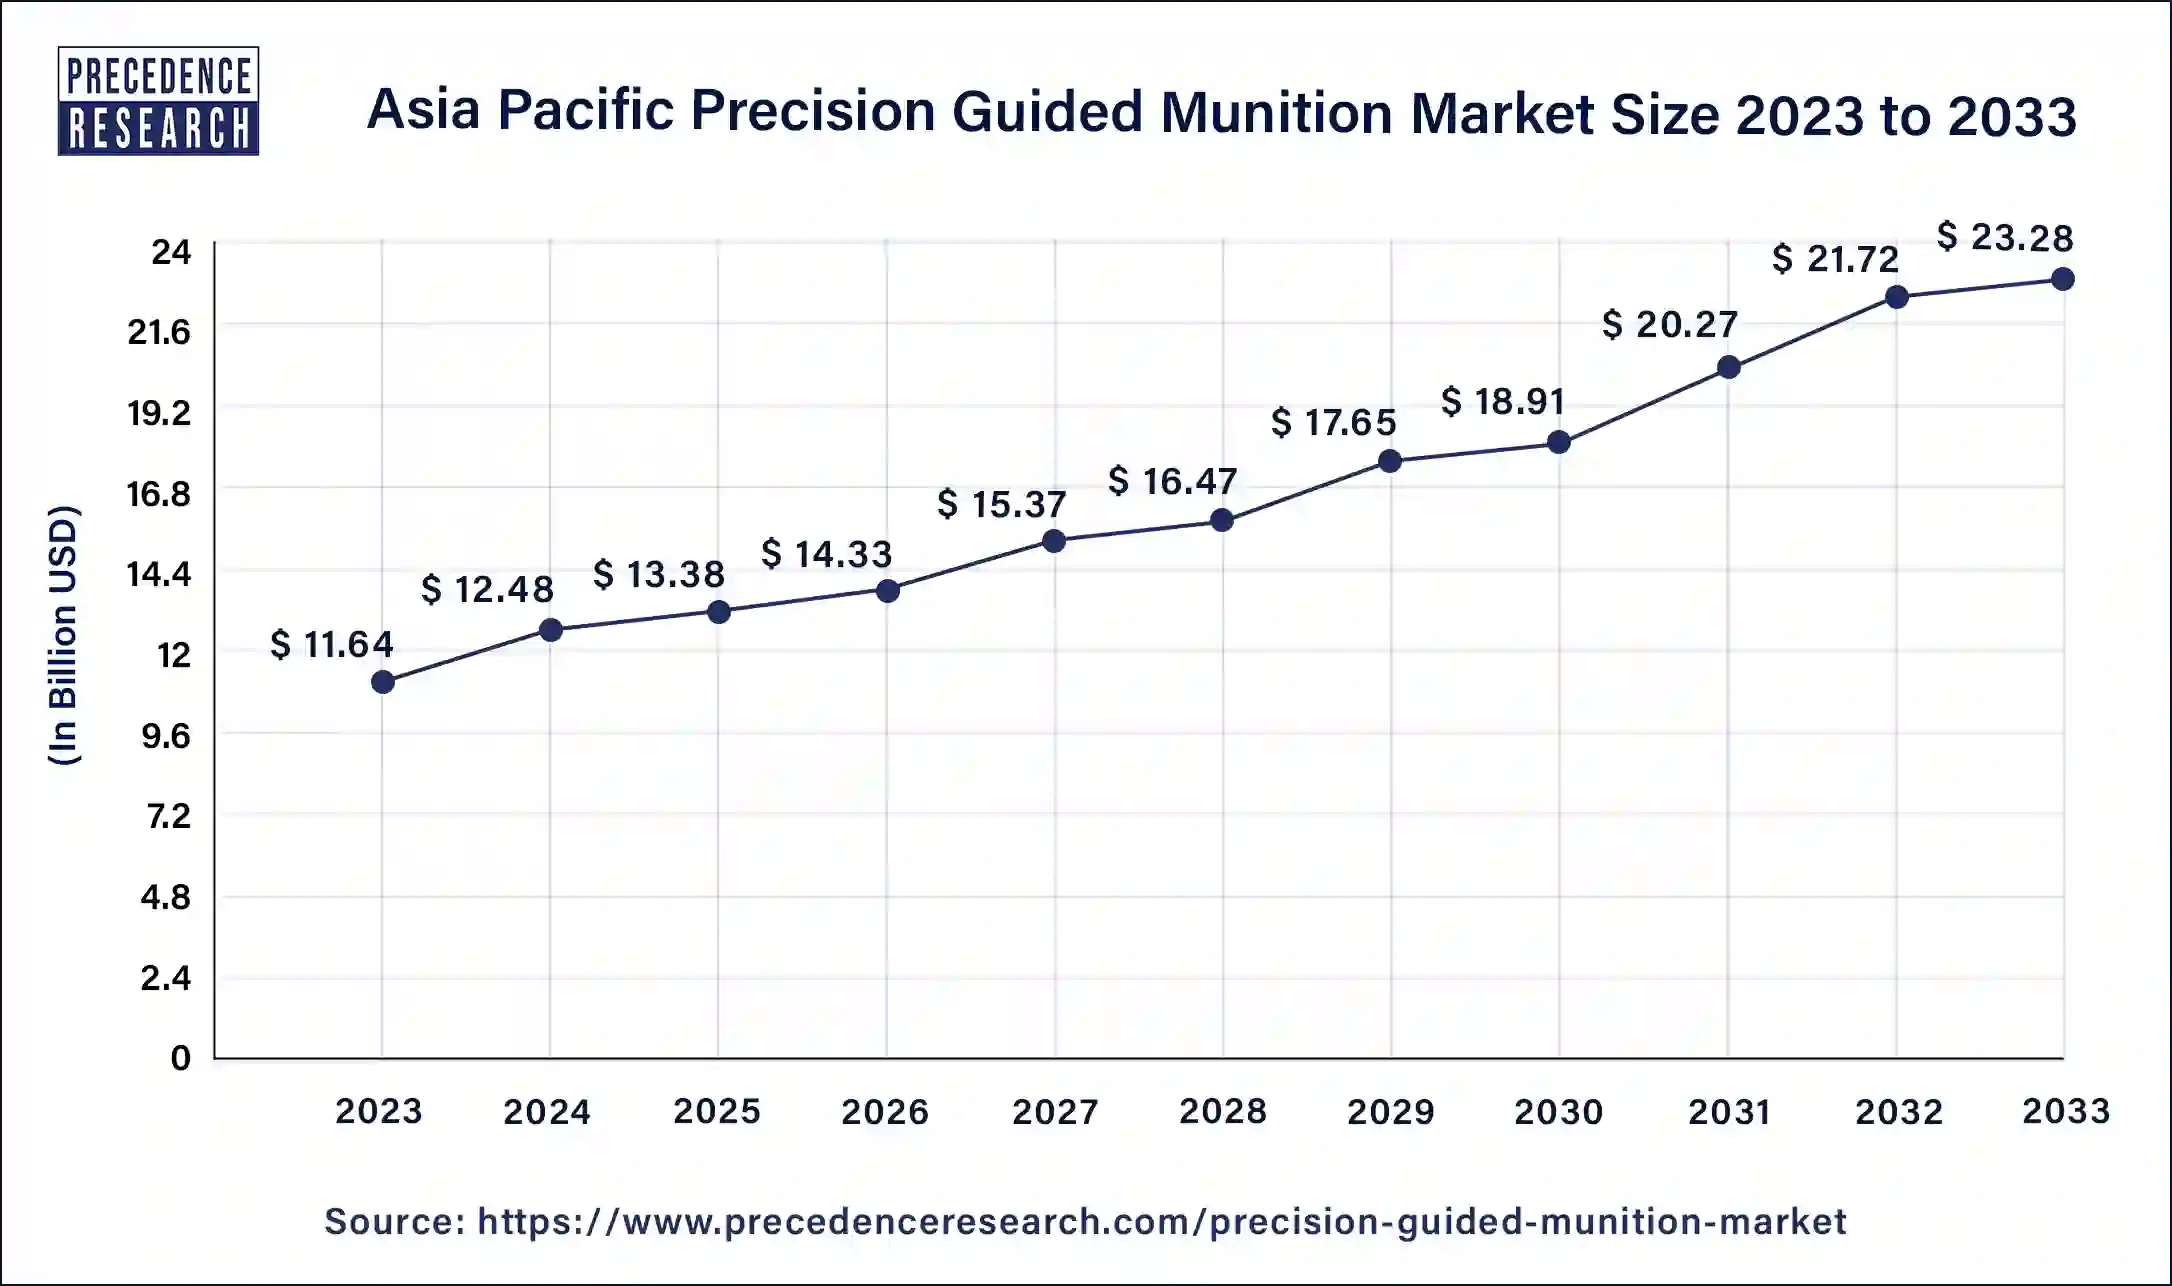 Asia Pacific Precision Guided Munition Market Size 2024 to 2033